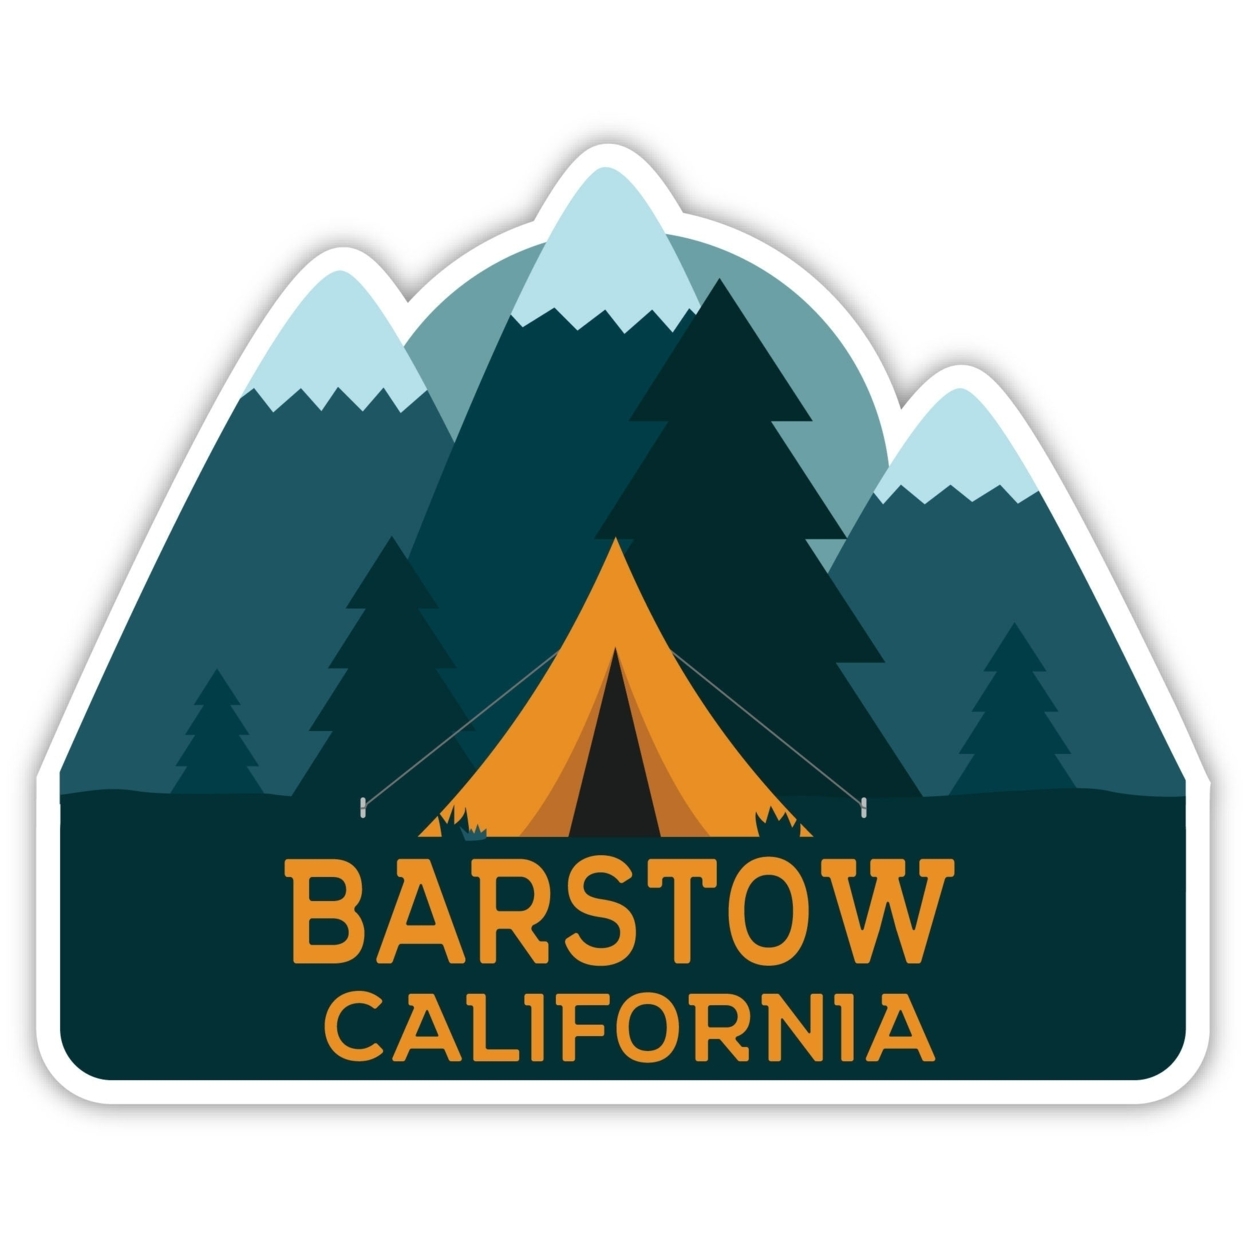 Barstow California Souvenir Decorative Stickers (Choose Theme And Size) - 4-Pack, 4-Inch, Tent